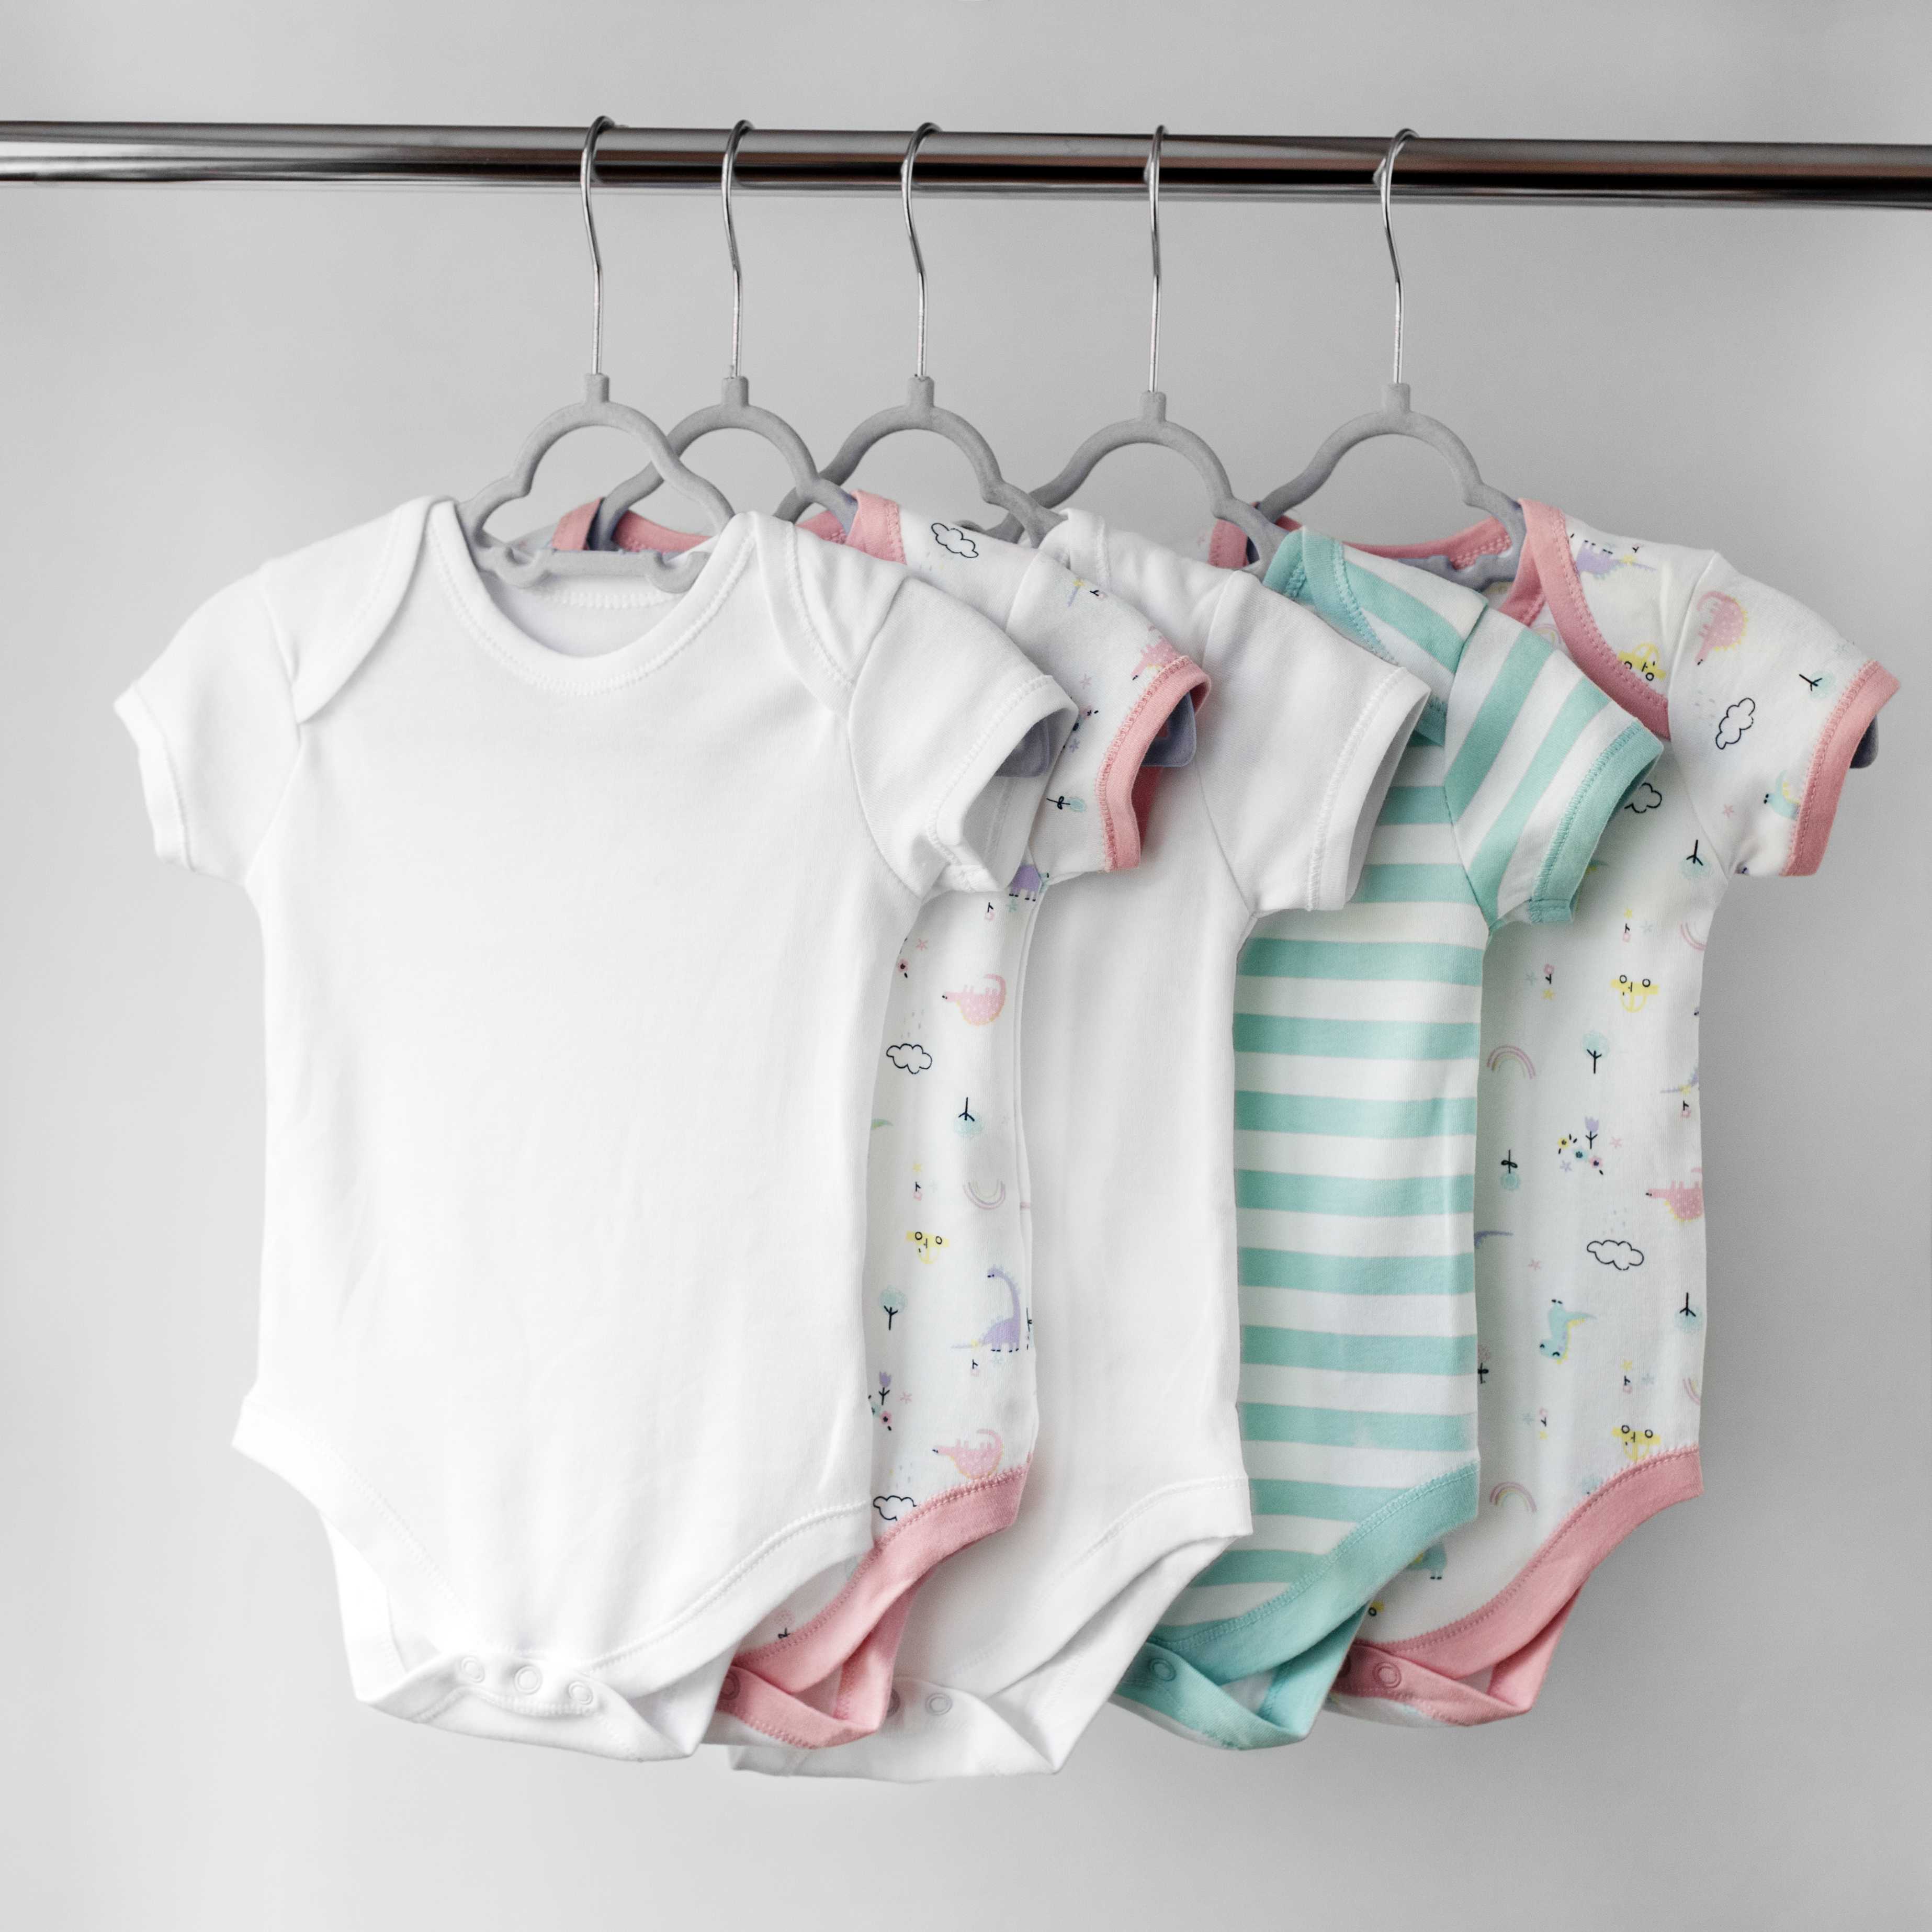 Clean baby clothes hanging on a rack